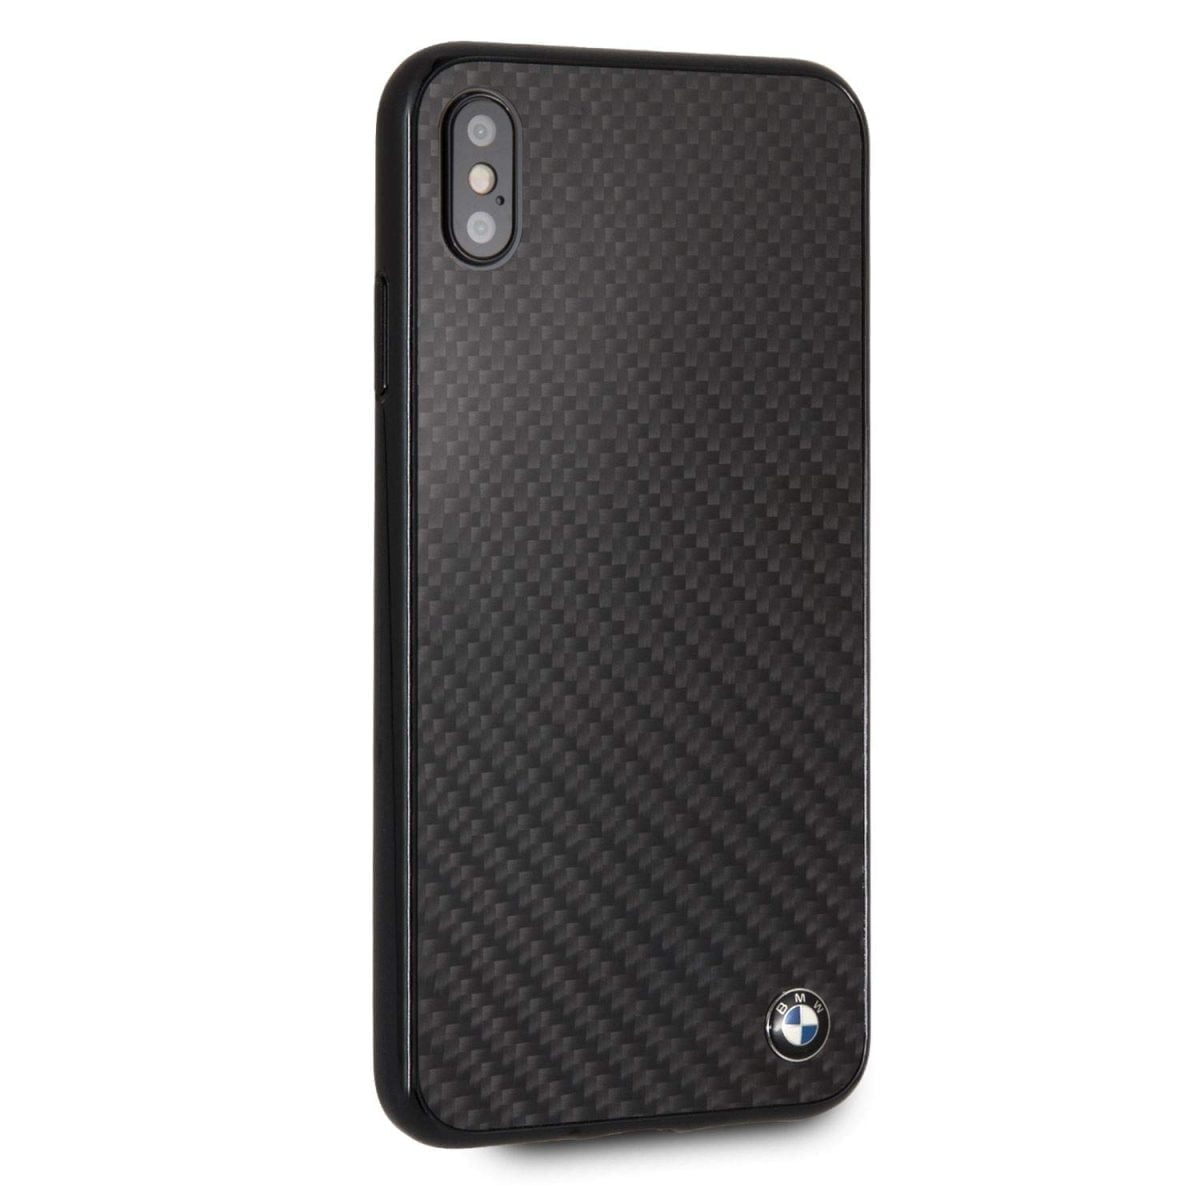 Cg Mobile Bmw Iphone Xs Max Case Black Carbon Hard Cell Phone Case Carbon Fiber Easily Accessible Ports Officially Licensed 06 غطاء آيفون ايفون Xs ماكس ألياف الكربون السوداء (Bmw)